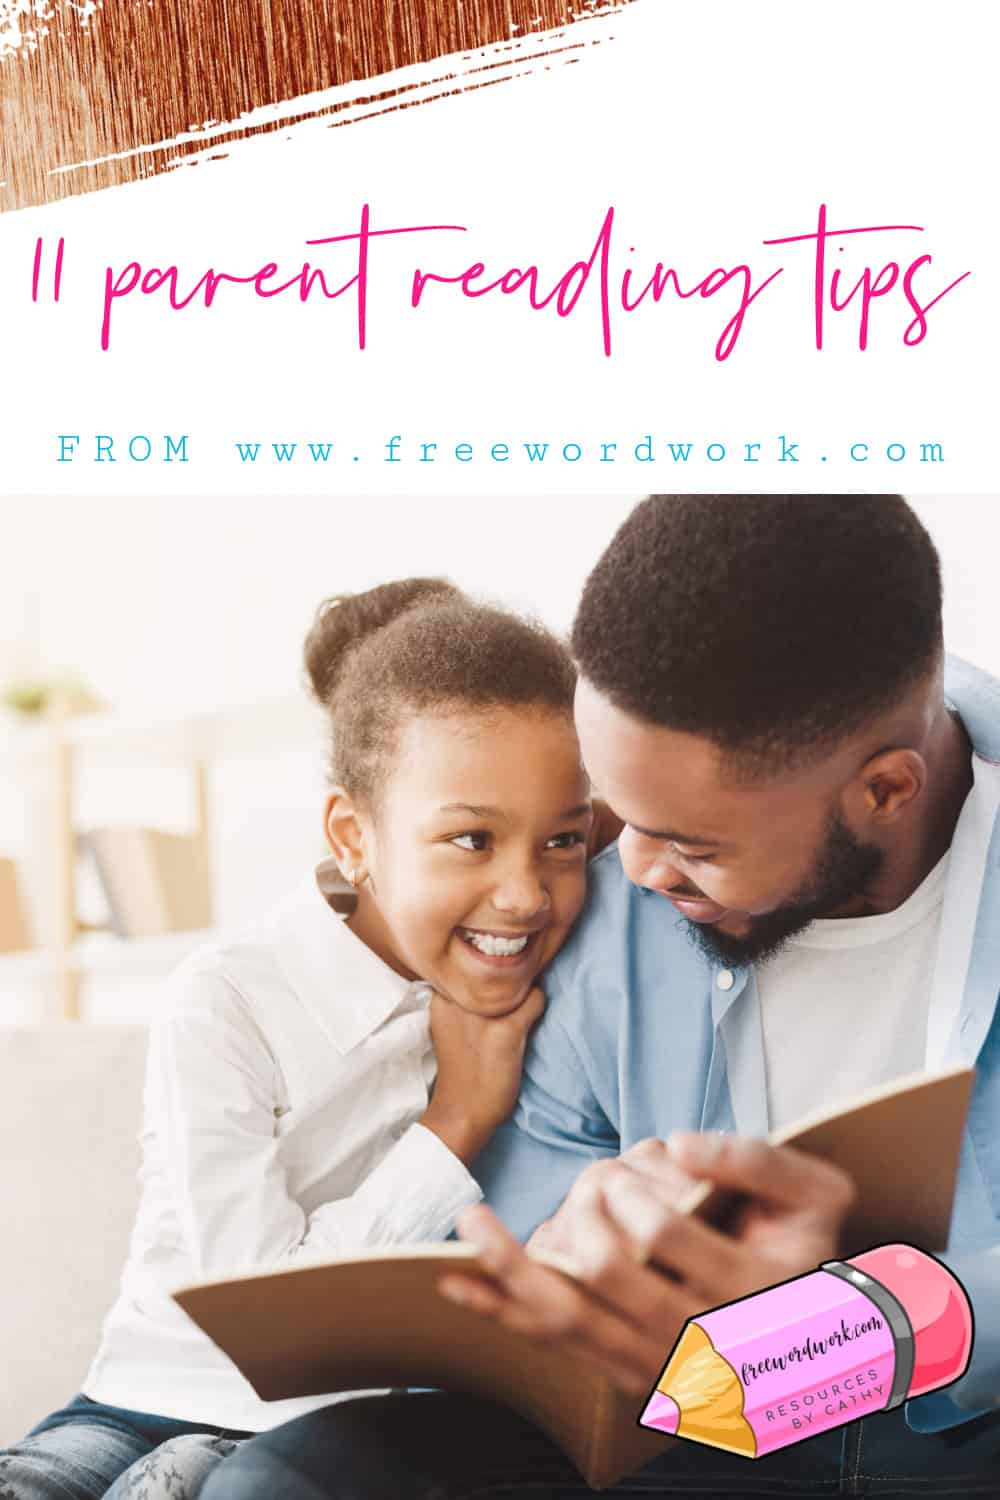 parent-reading-tips-free-word-work